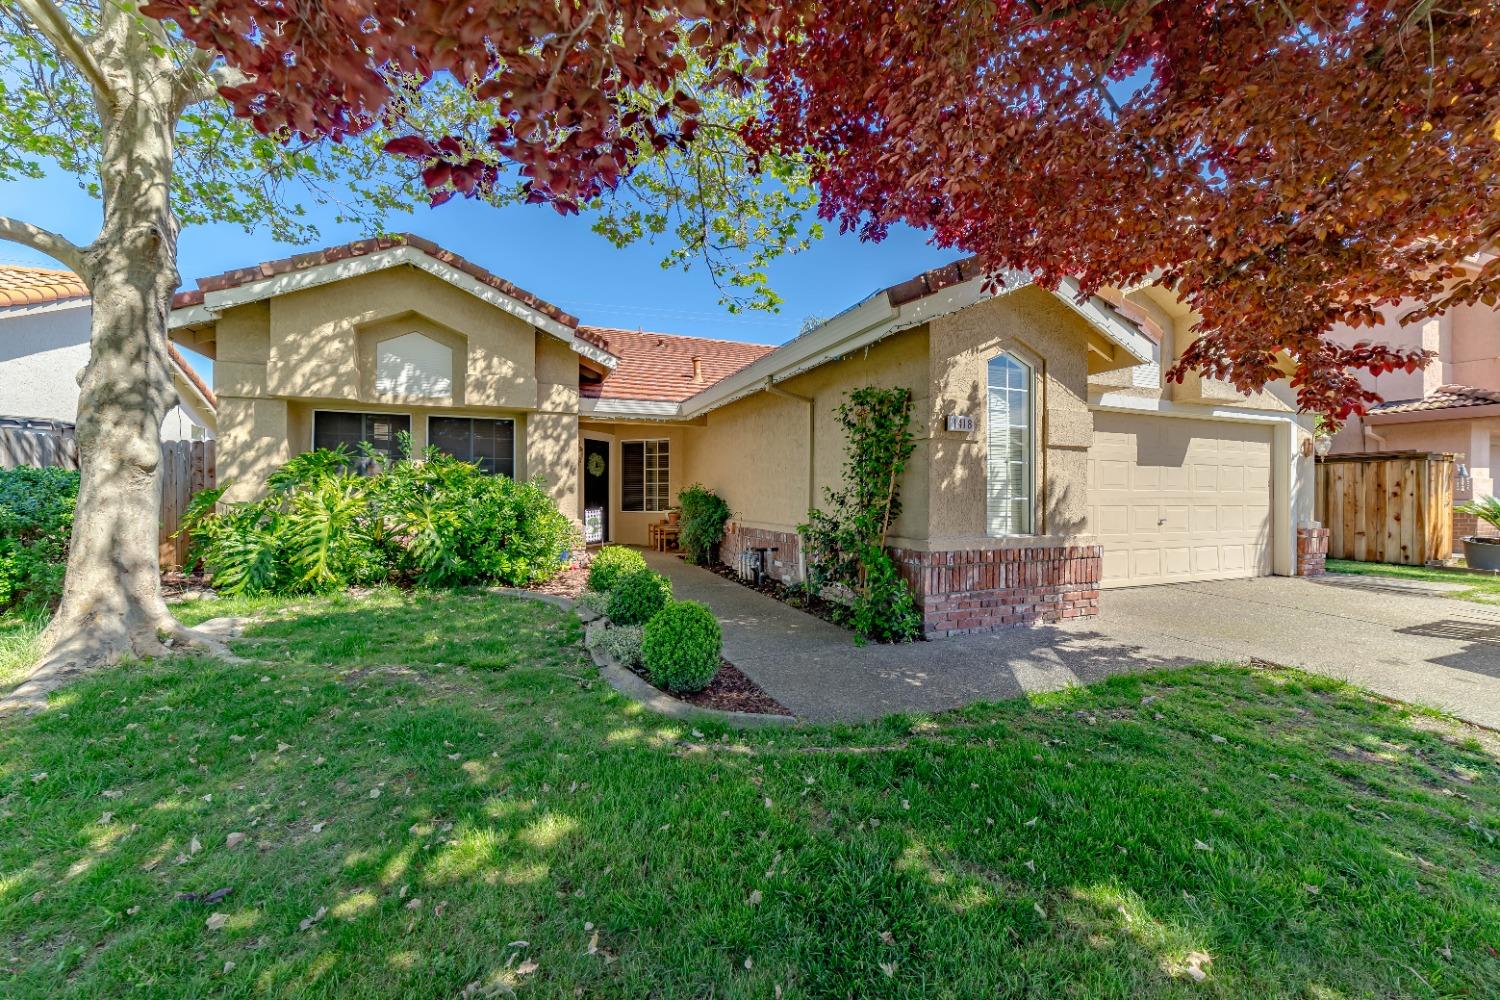 Photo of 1418 Lorimer Wy in Roseville, CA